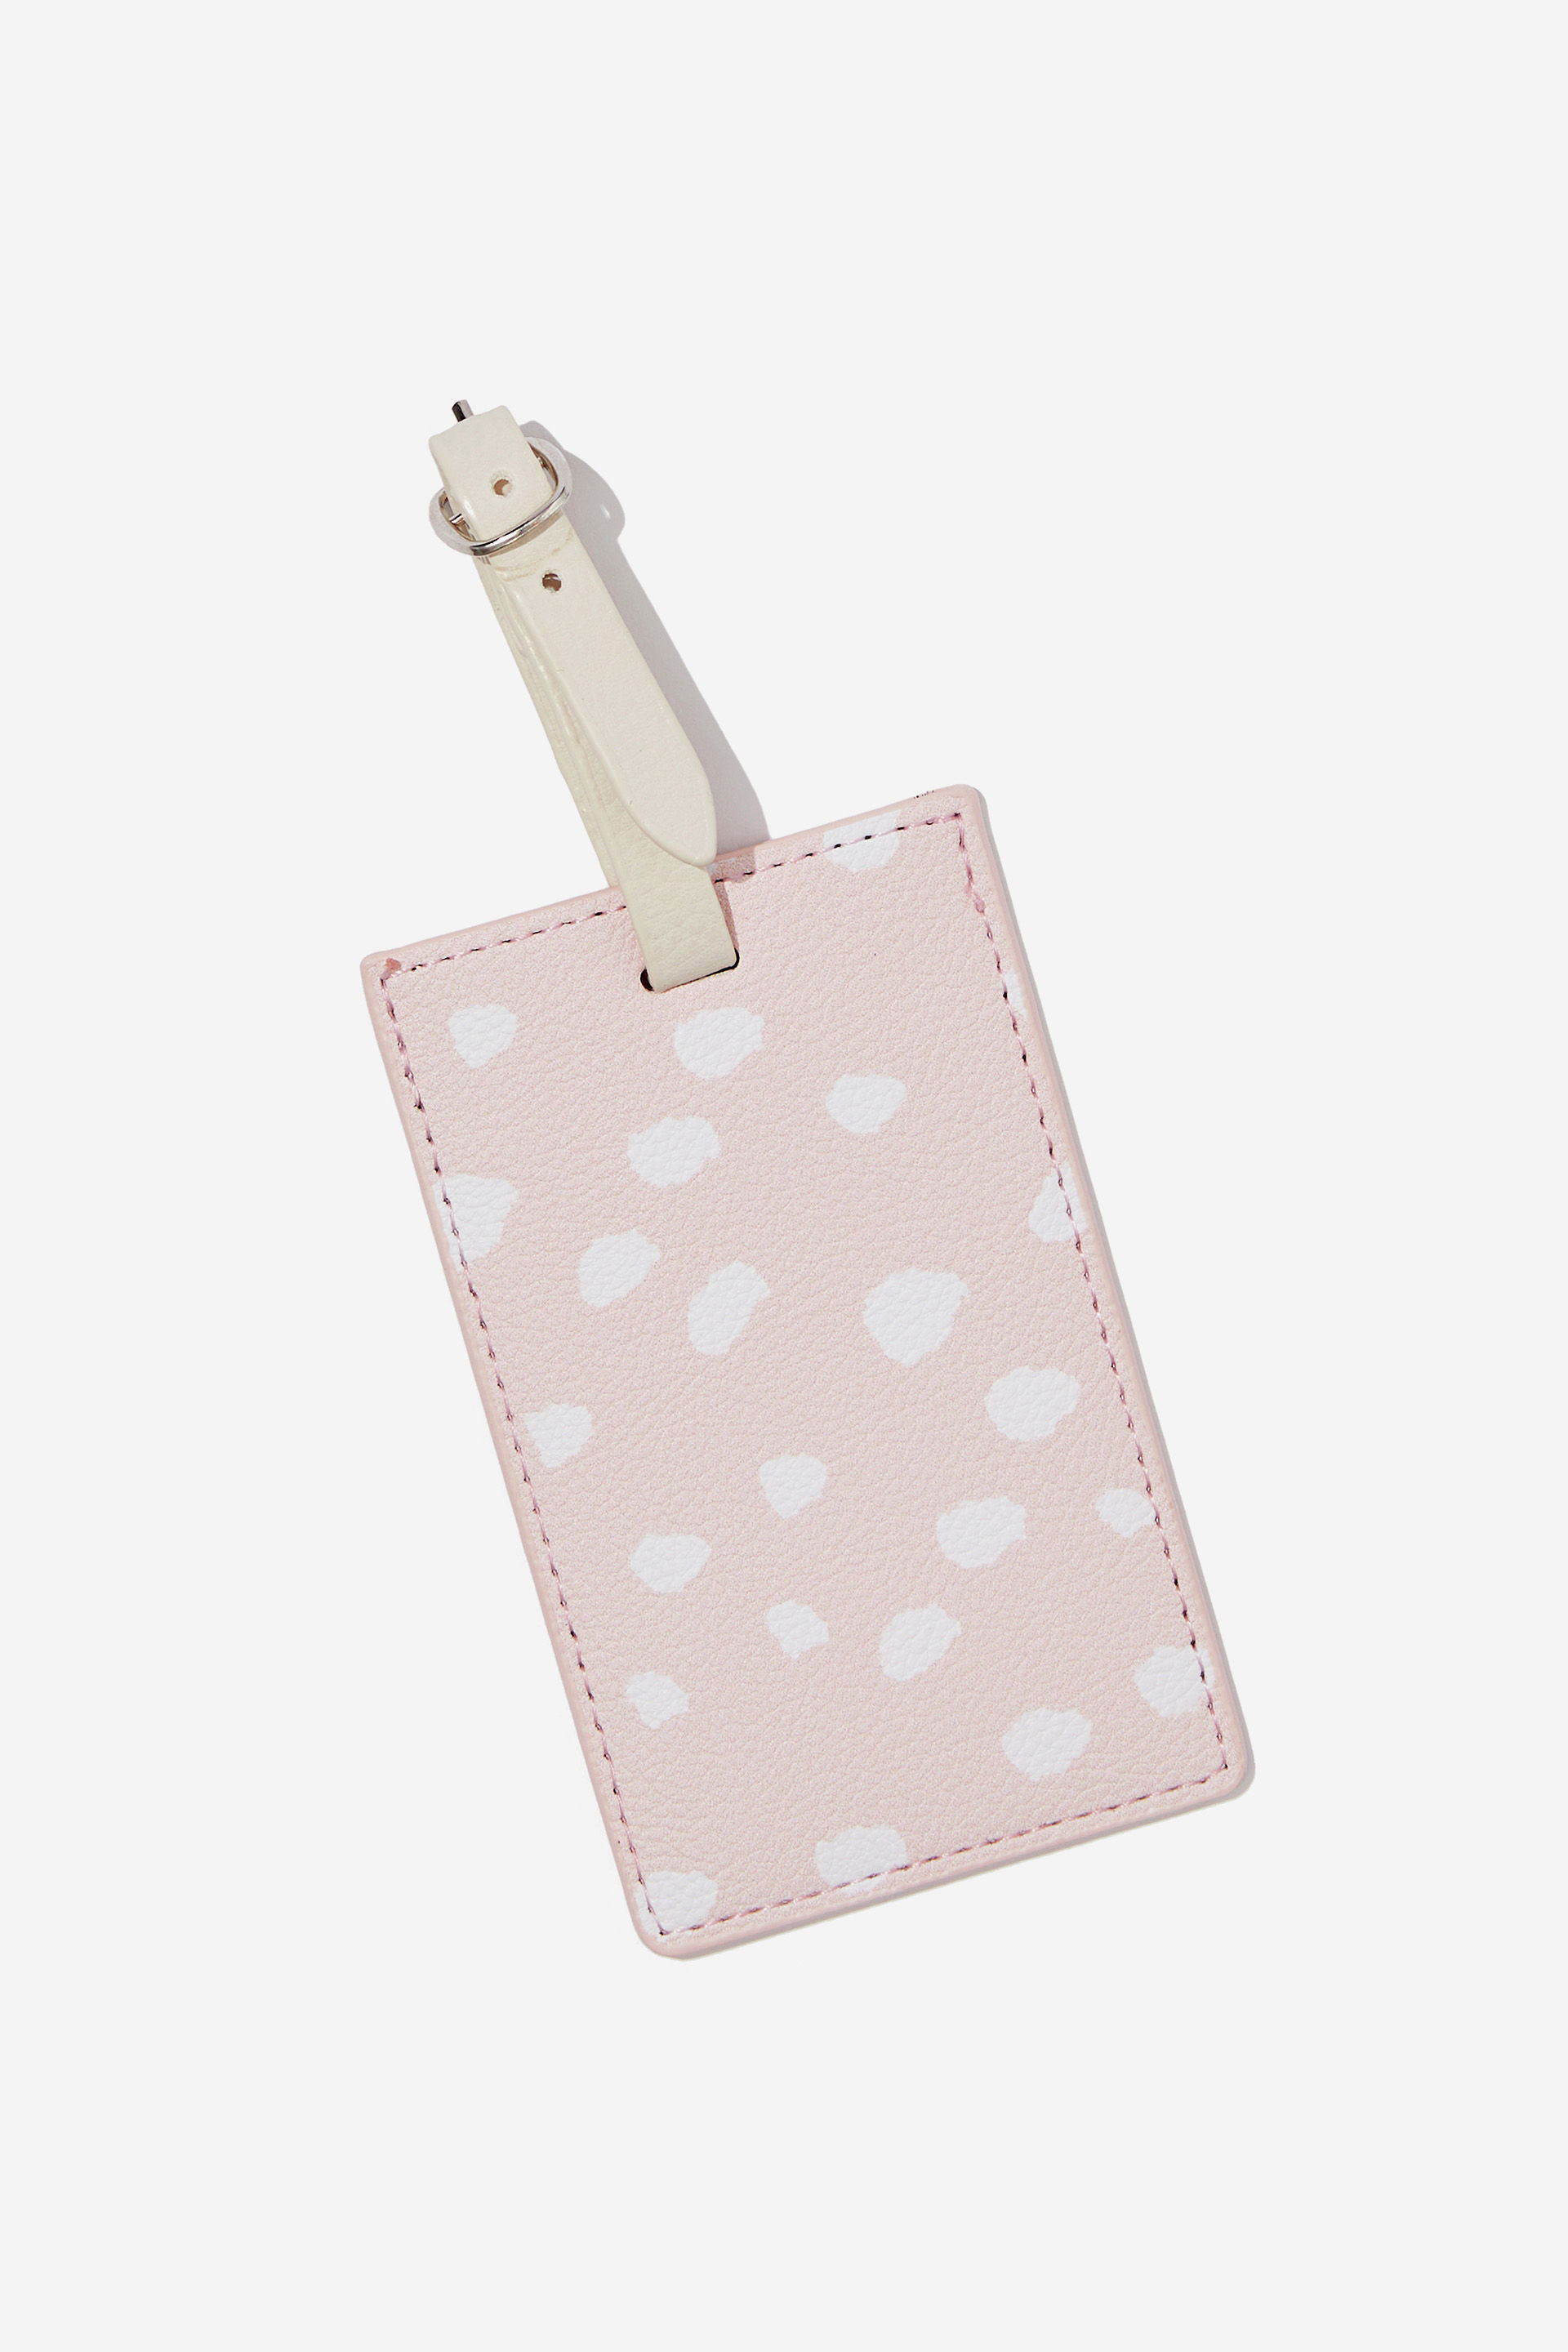 Typo - Off The Grid Luggage Tag - Spots / ballet blush